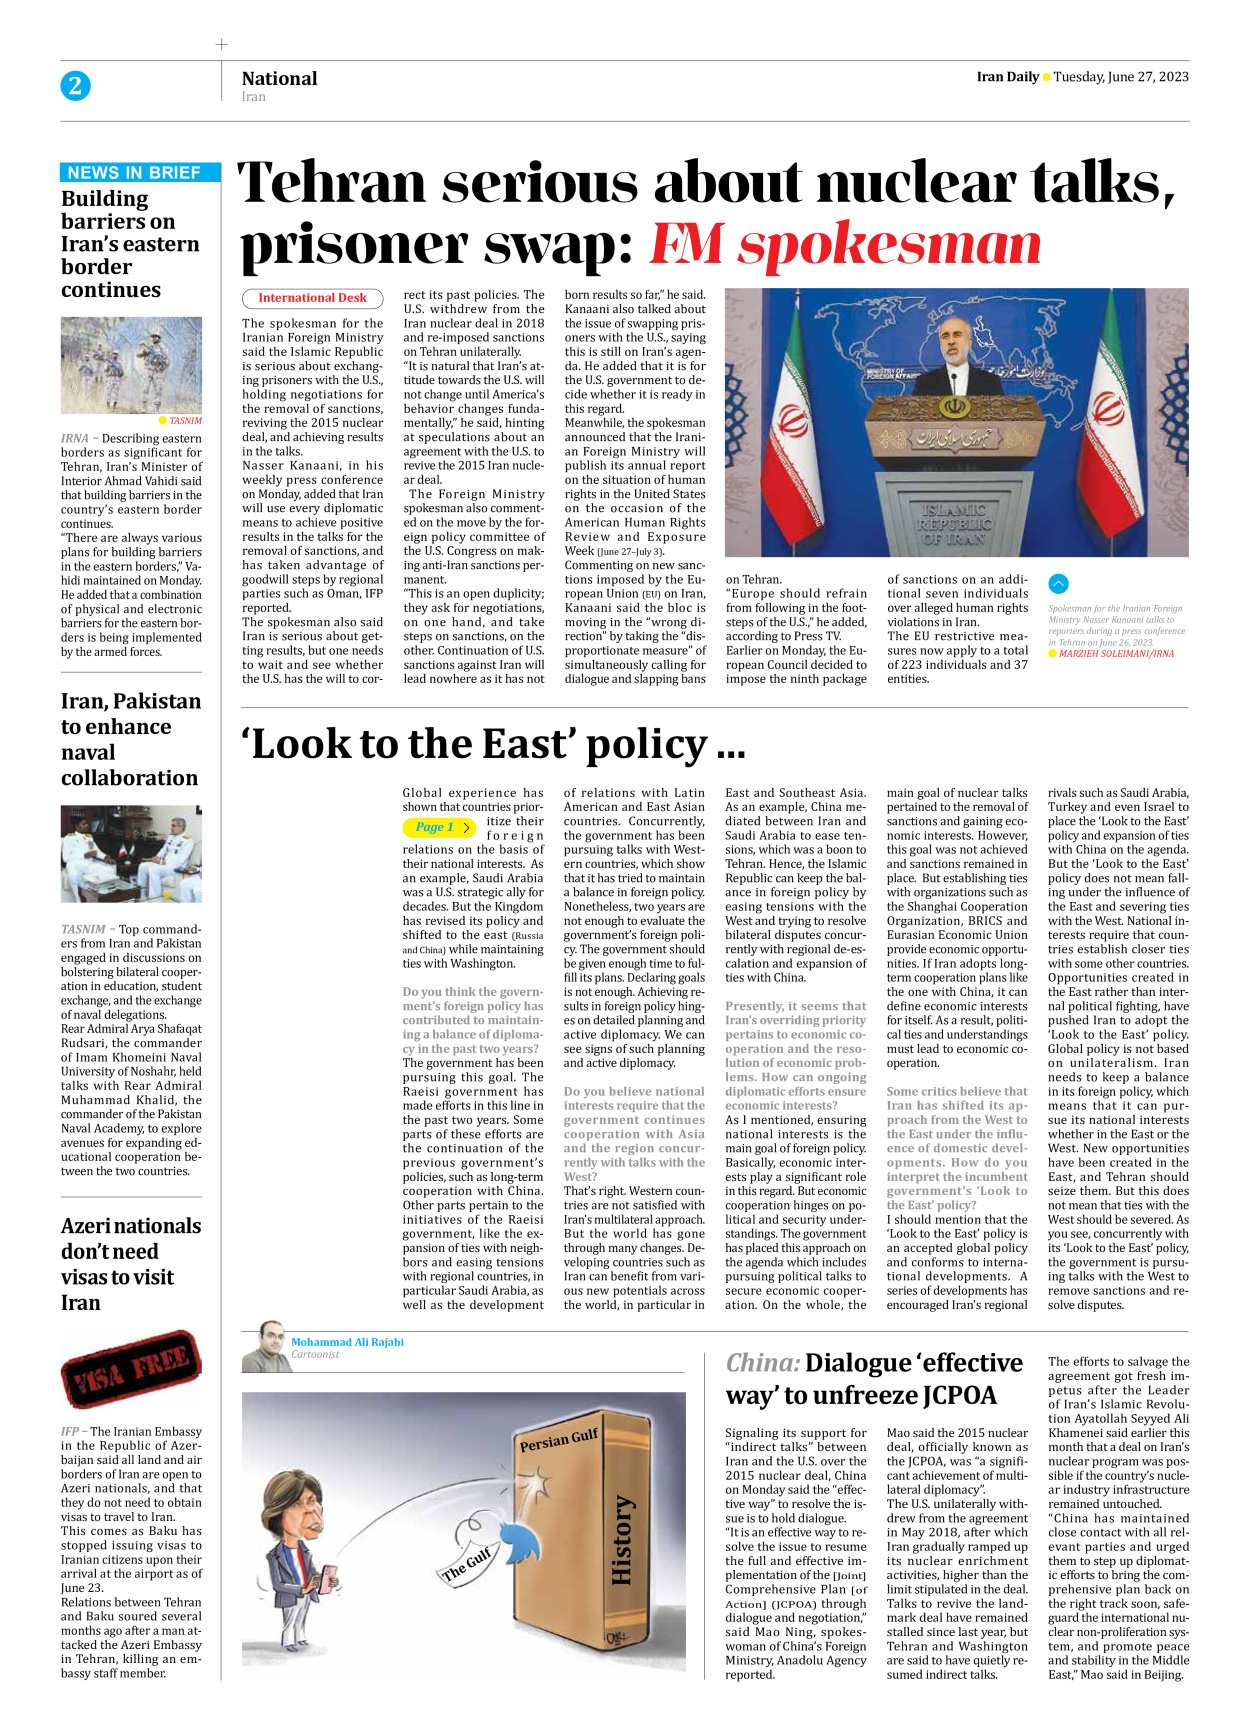 Iran Daily - Number Seven Thousand Three Hundred and Twenty Five - 27 June 2023 - Page 2